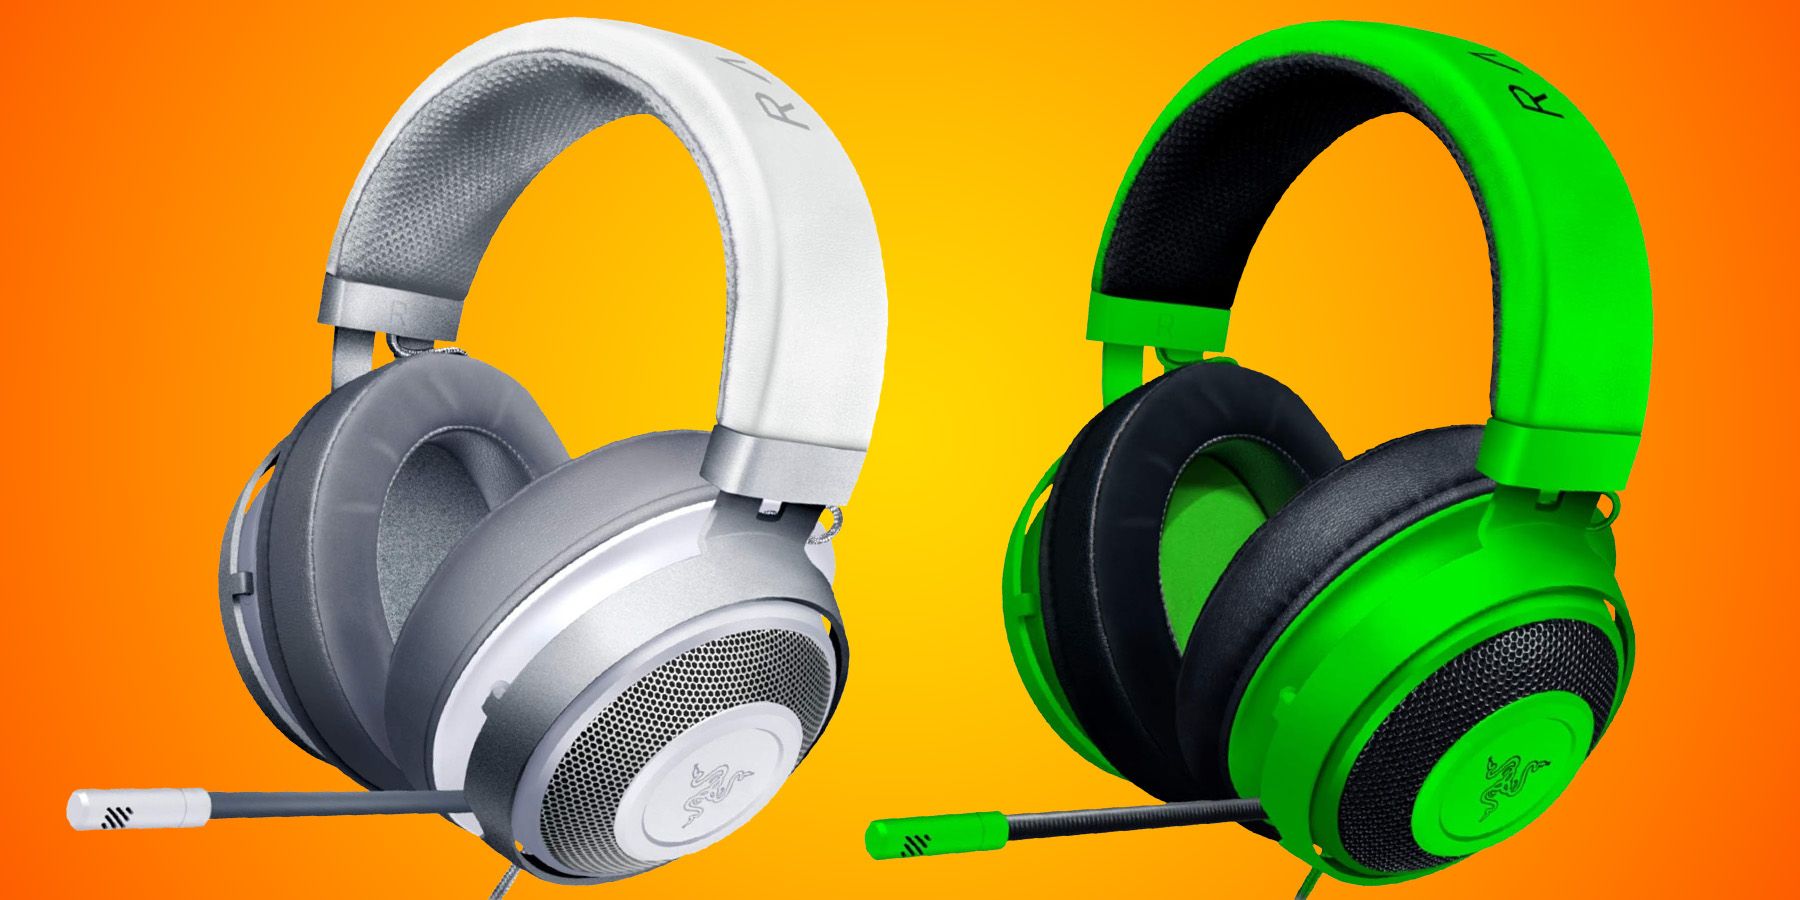 The Razer Kraken Gaming Headset is Available at a 38% Discount